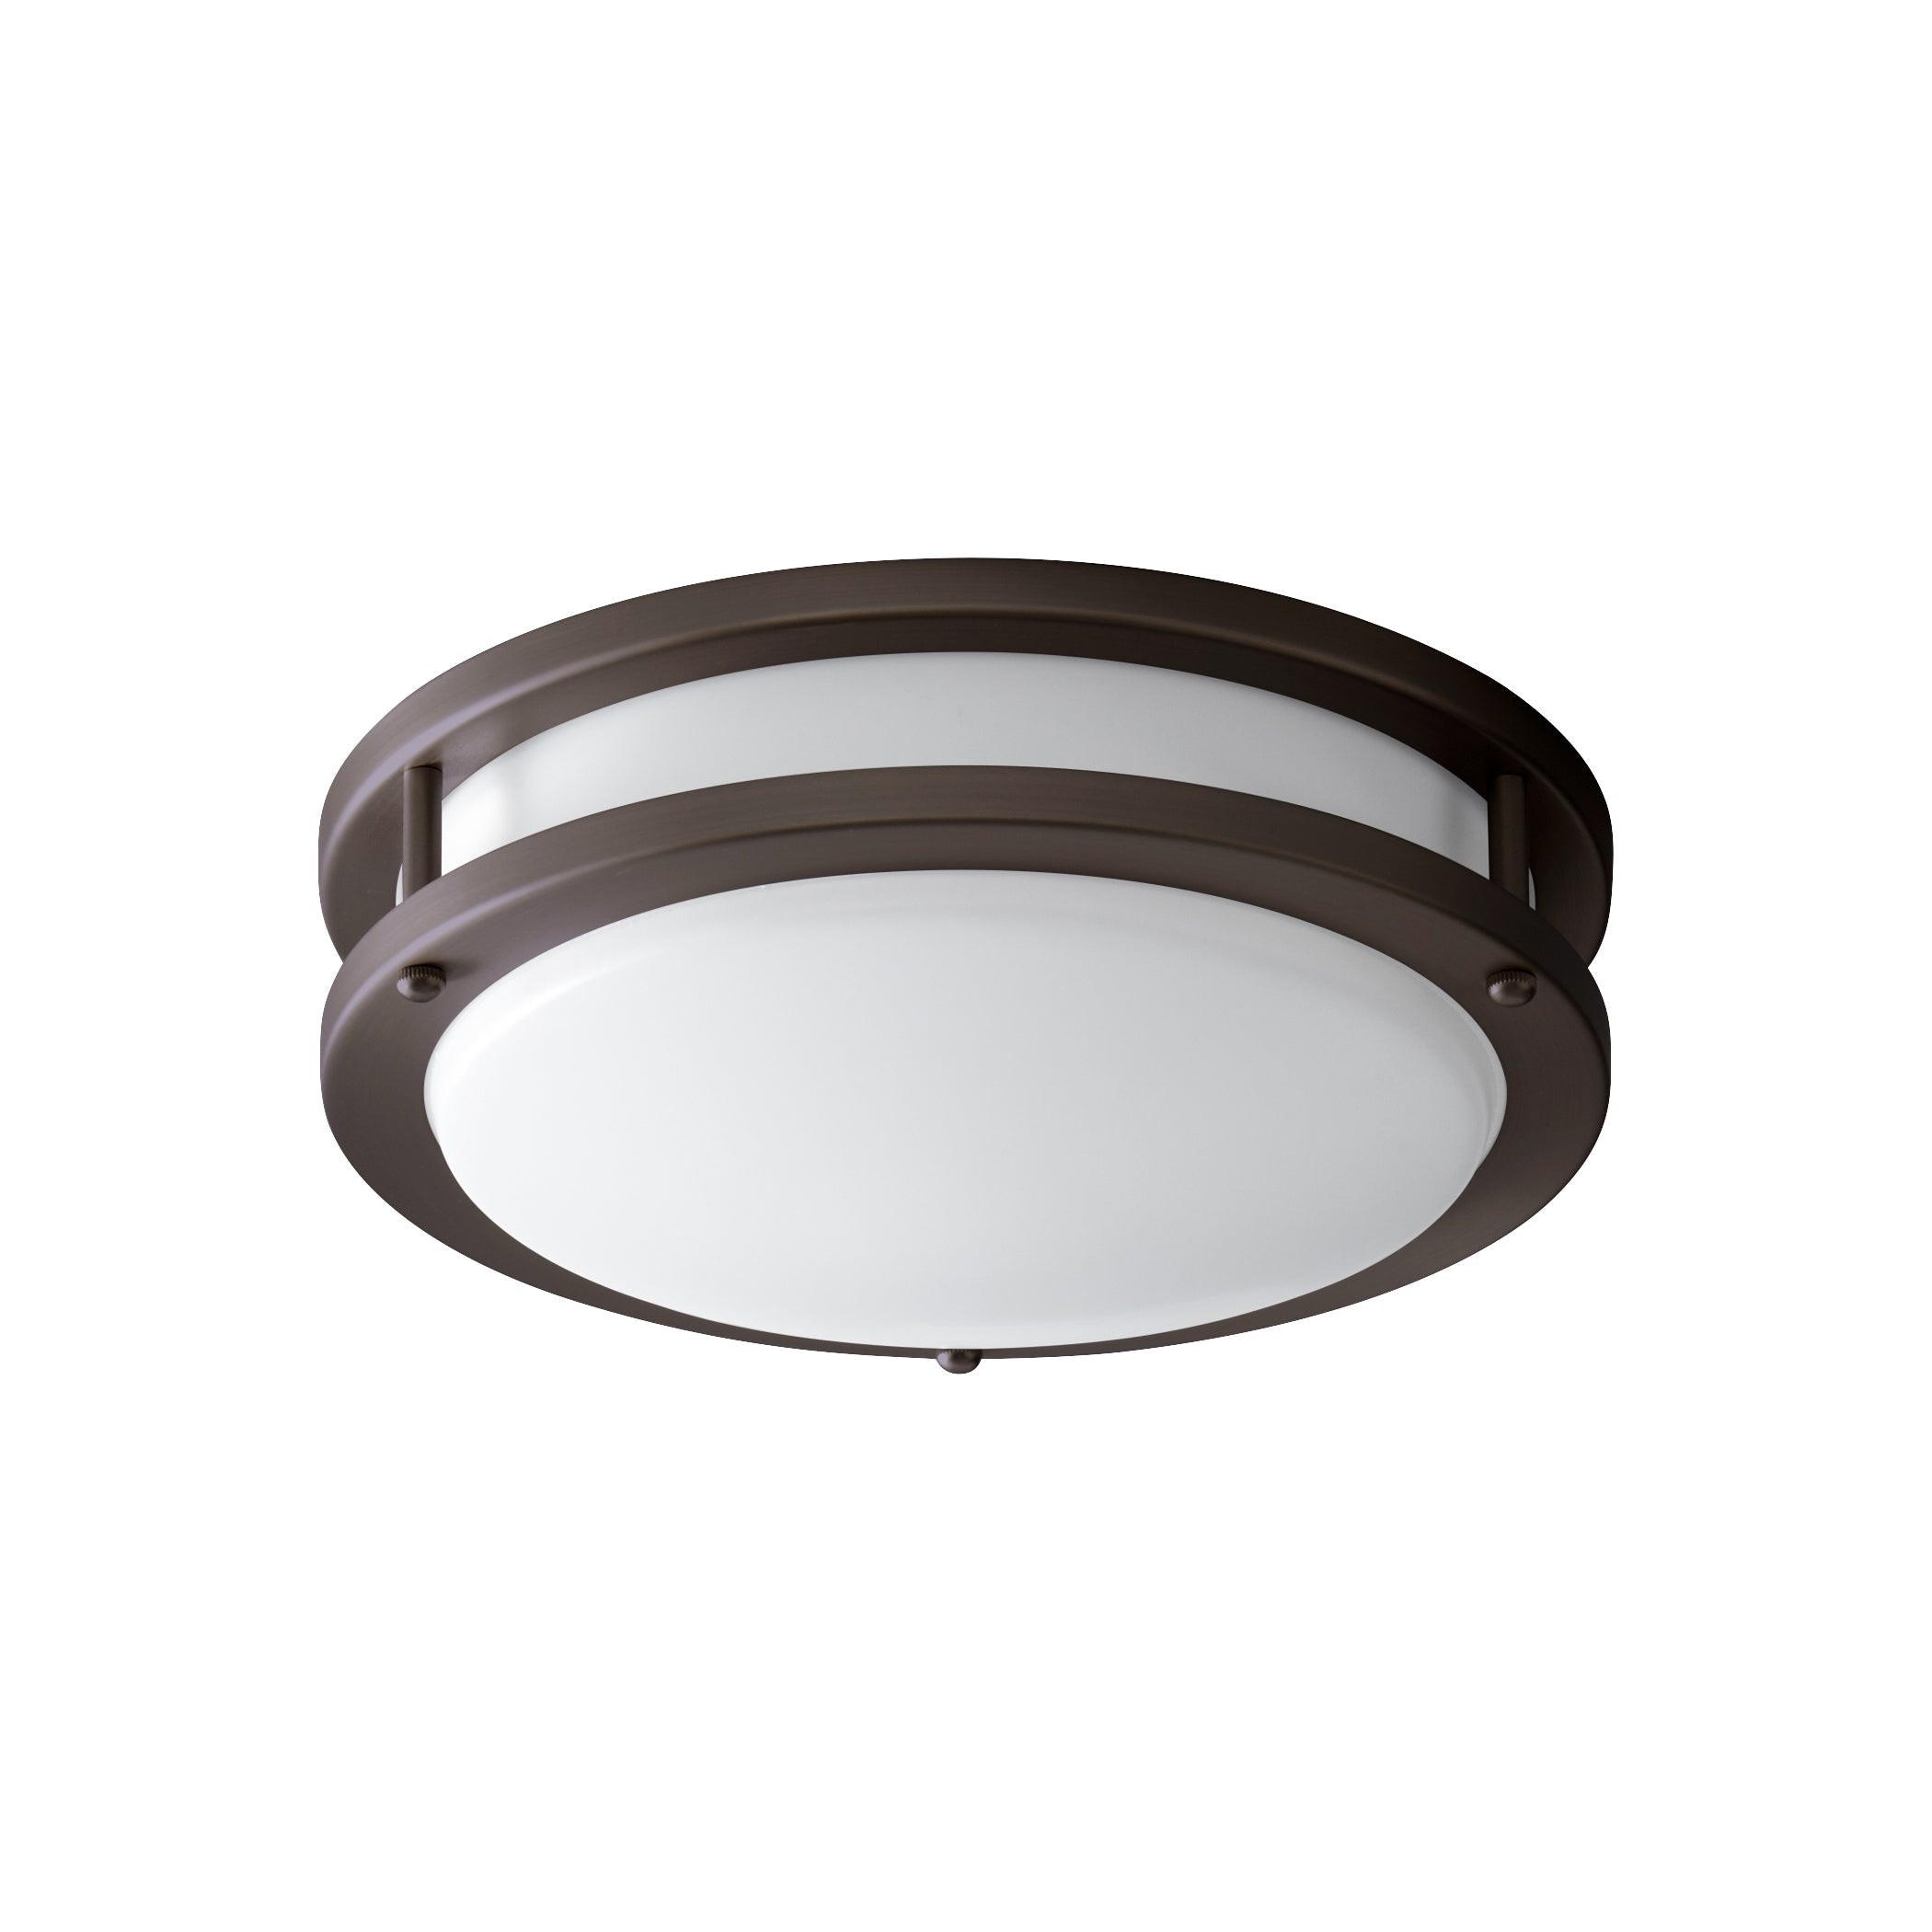 Oxygen Oracle 3-618-22 Traditional Flush Mount Ceiling Light Round 10 Inch - Oiled Bronze